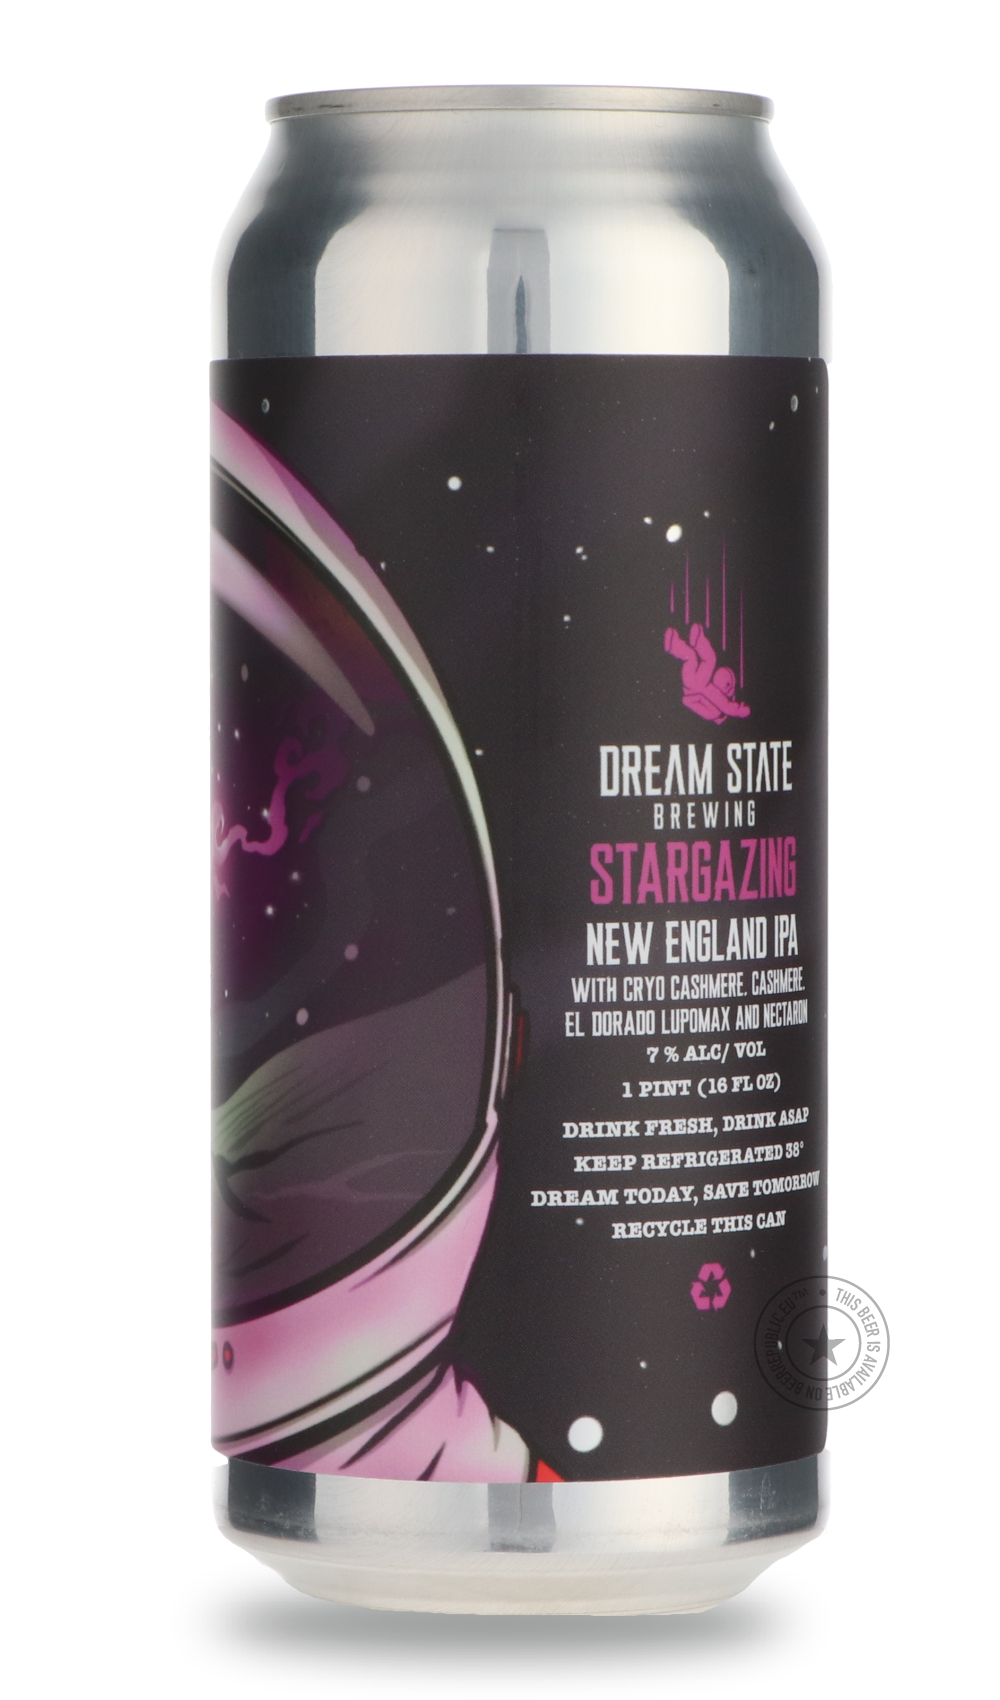 -Dream State- Stargazing-IPA- Only @ Beer Republic - The best online beer store for American & Canadian craft beer - Buy beer online from the USA and Canada - Bier online kopen - Amerikaans bier kopen - Craft beer store - Craft beer kopen - Amerikanisch bier kaufen - Bier online kaufen - Acheter biere online - IPA - Stout - Porter - New England IPA - Hazy IPA - Imperial Stout - Barrel Aged - Barrel Aged Imperial Stout - Brown - Dark beer - Blond - Blonde - Pilsner - Lager - Wheat - Weizen - Amber - Barley W